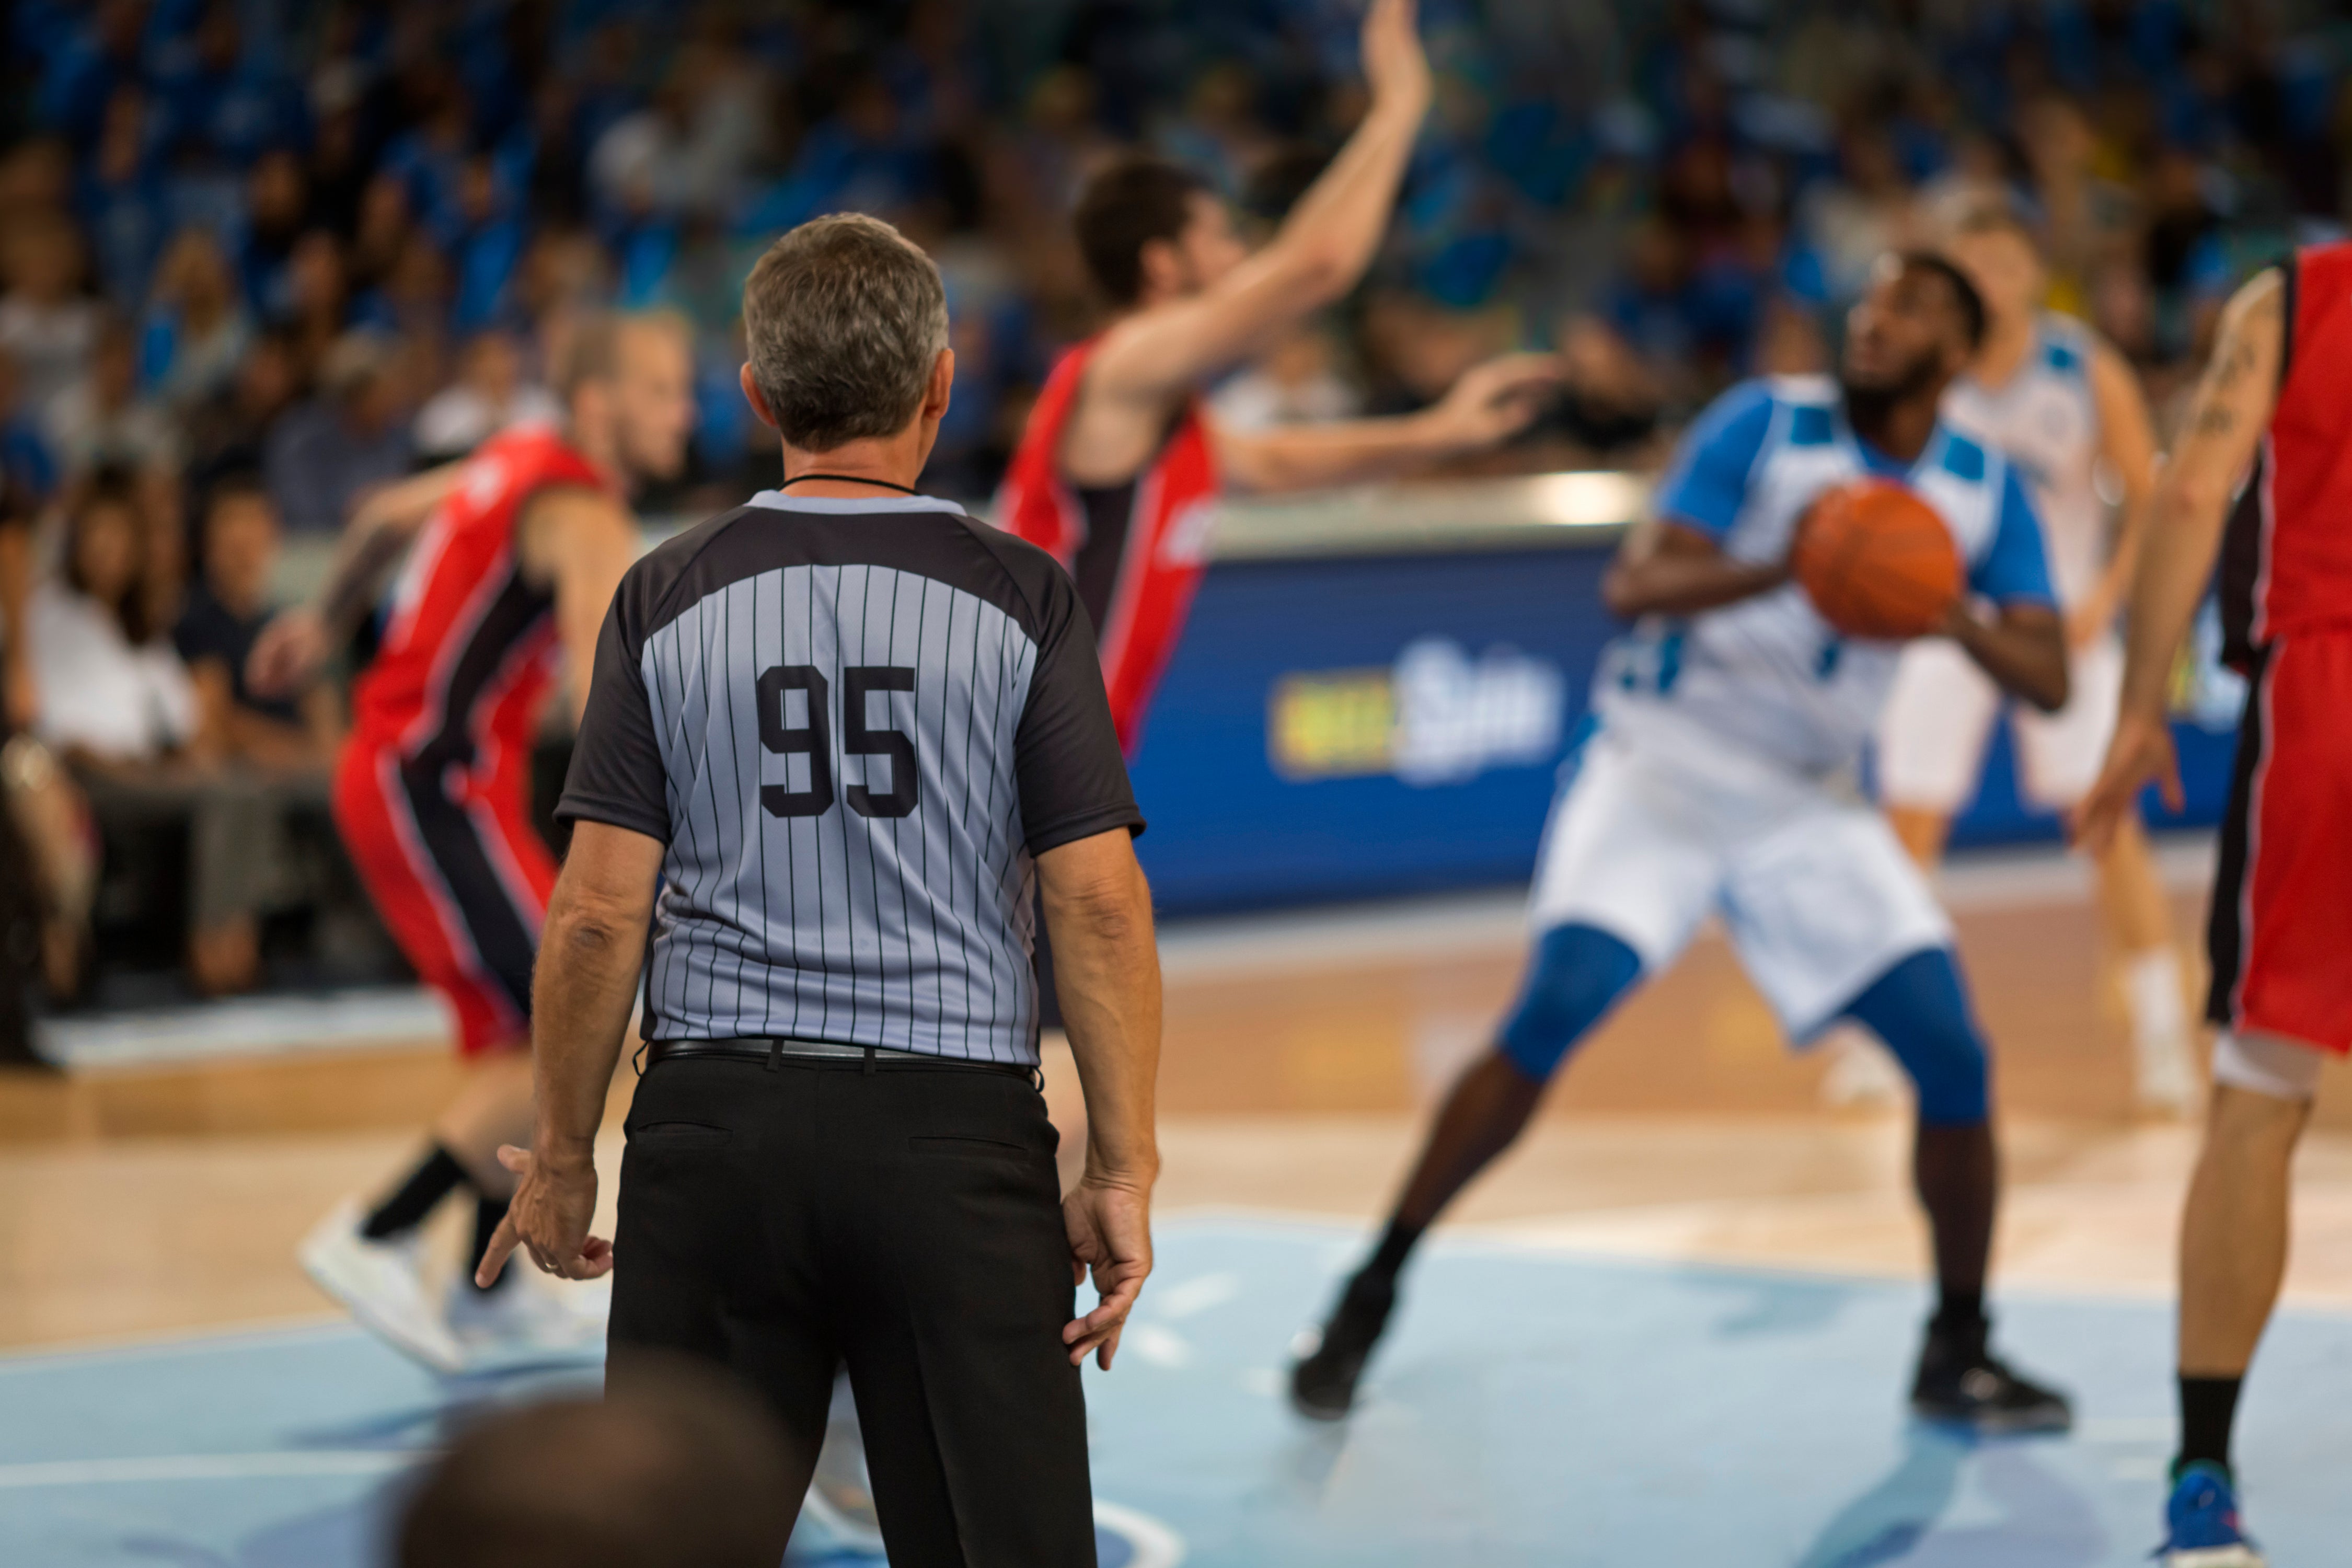 Referee in foreground monitors a basketball game, players seen in background